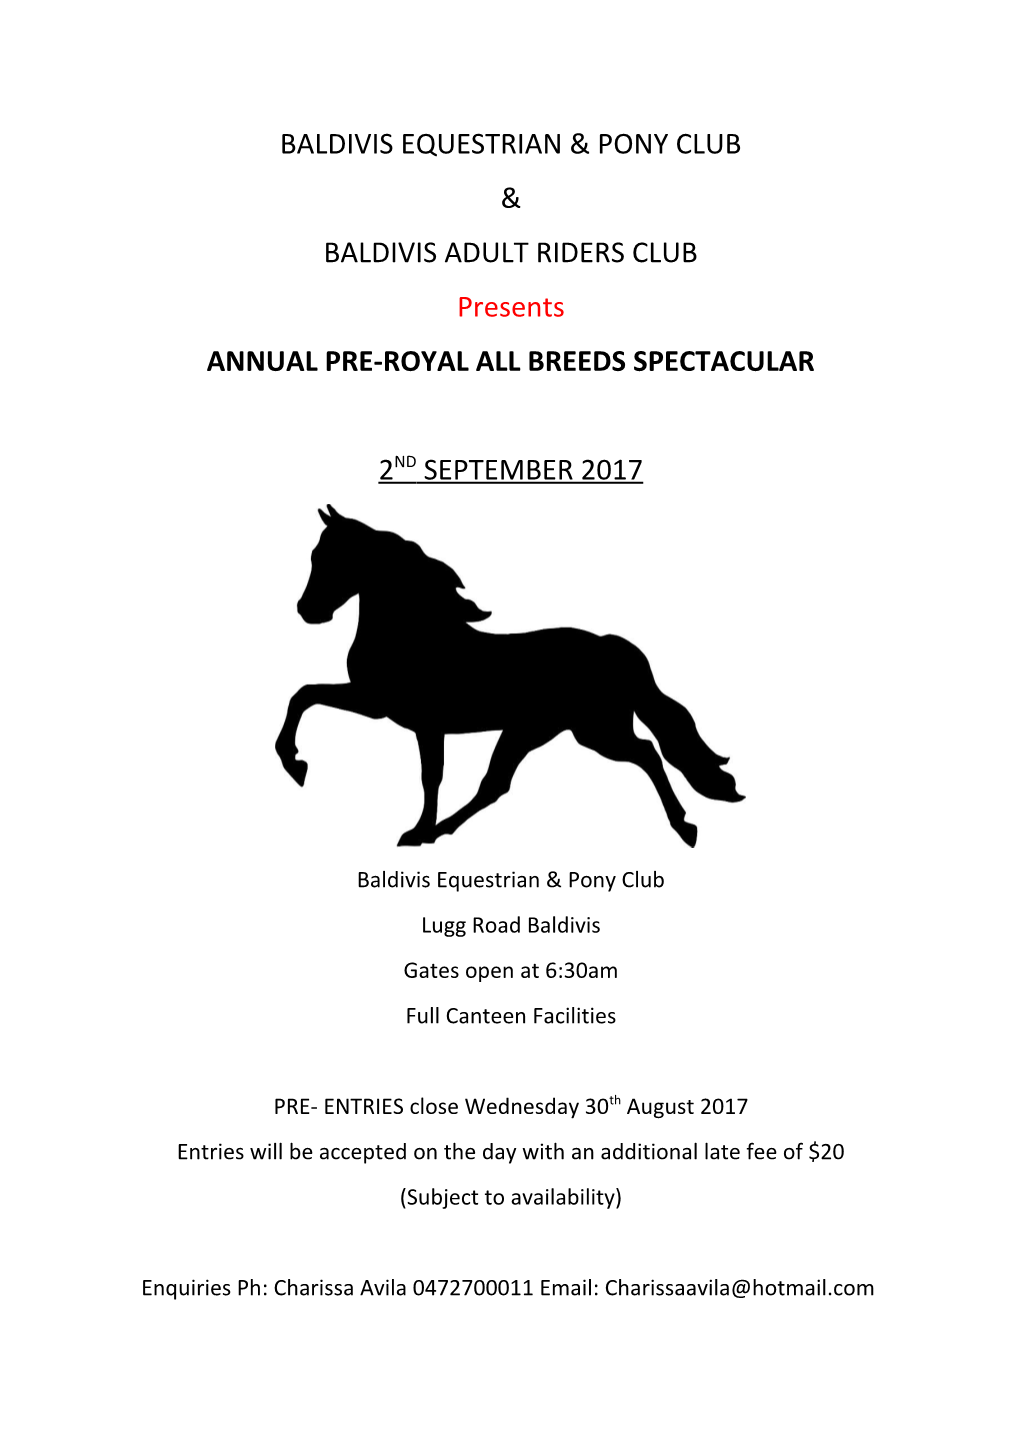 Annual Pre-Royal All Breeds Spectacular